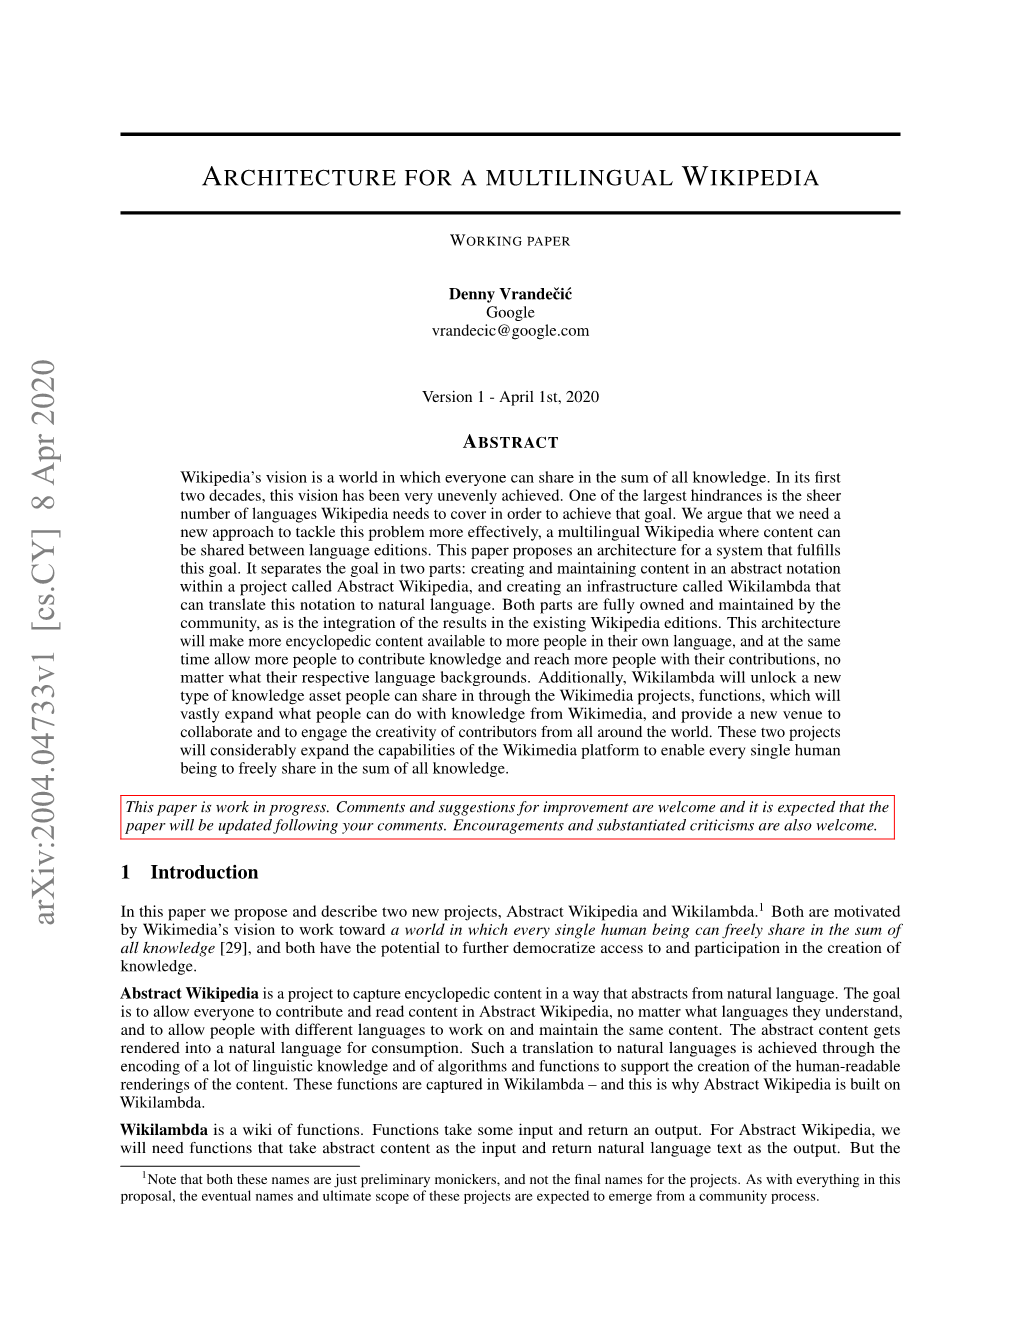 Architecture for a Multilingual Wikipedia WORKING PAPER